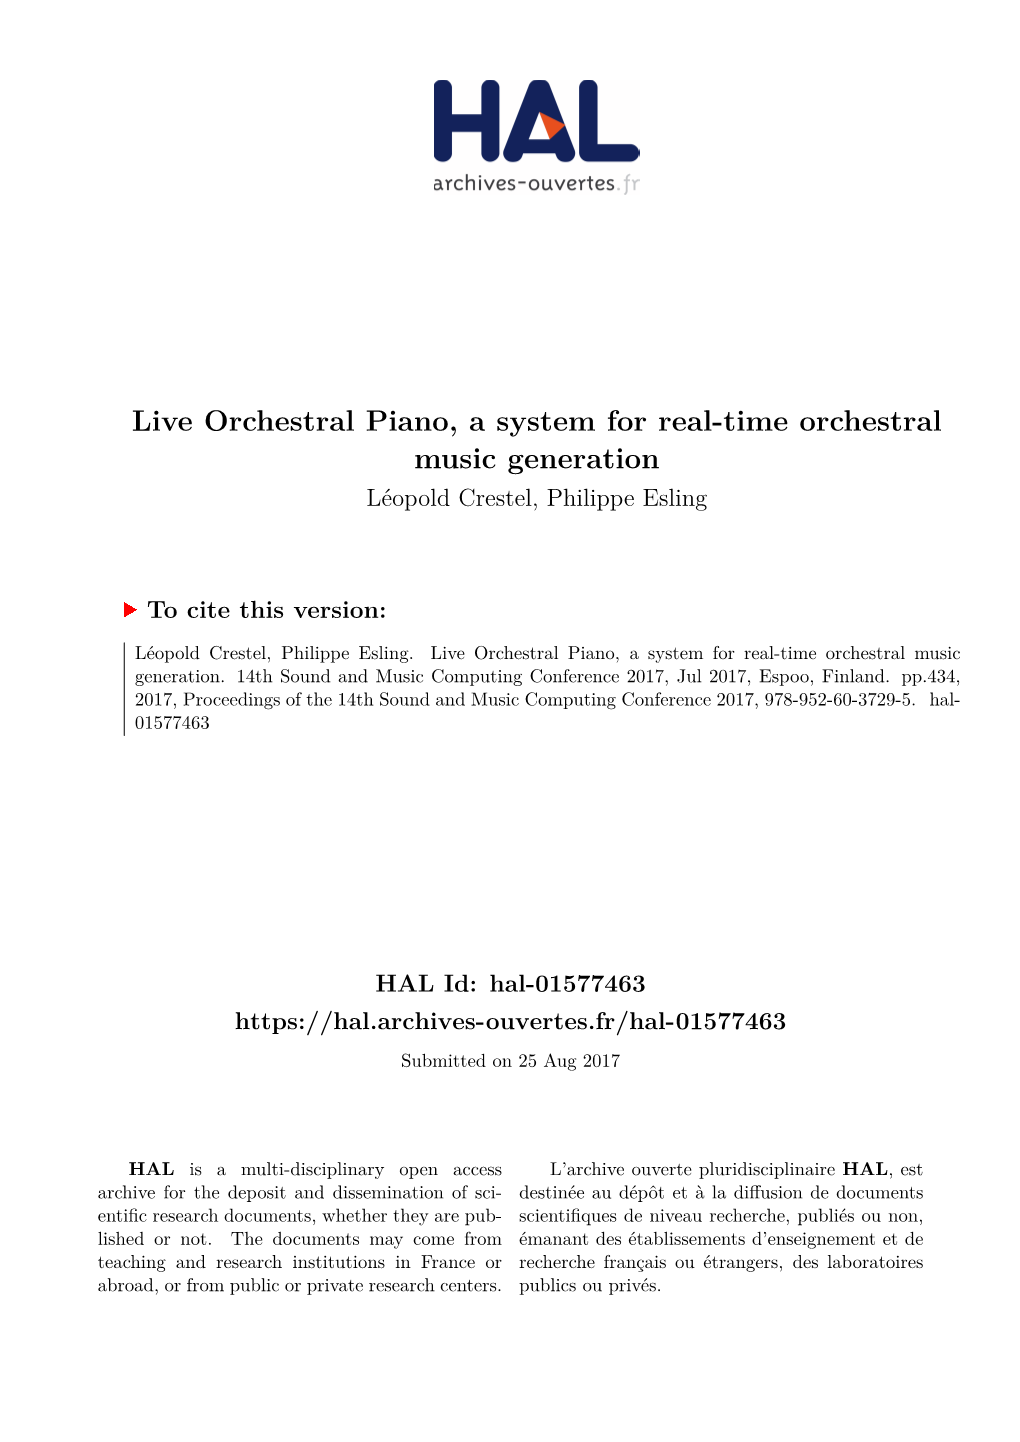 Live Orchestral Piano, a System for Real-Time Orchestral Music Generation Léopold Crestel, Philippe Esling